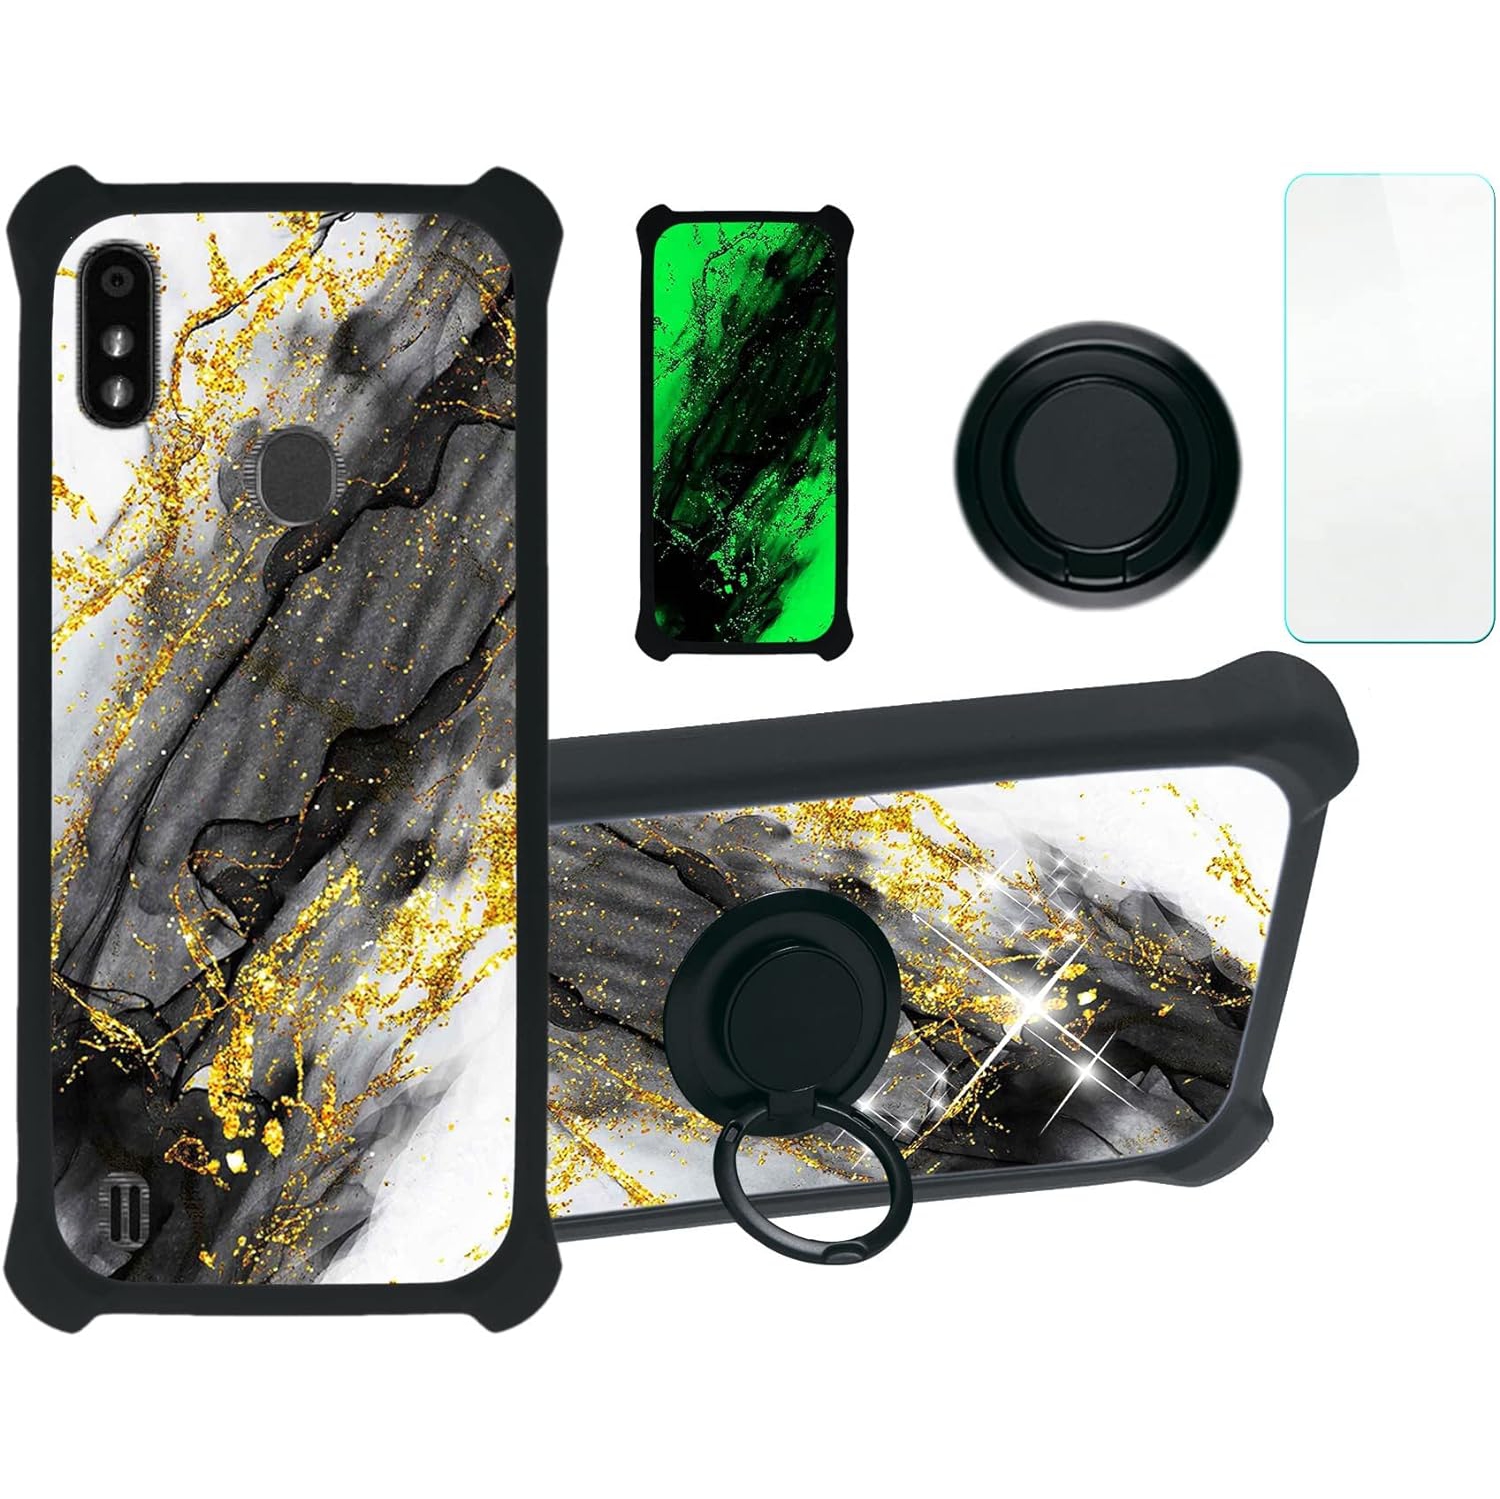 Case for Zte Blade A3 Prime Case Compatible with Zte Blade A3y, Gabb Z2 Phone Case Cover [Hard PC + Soft